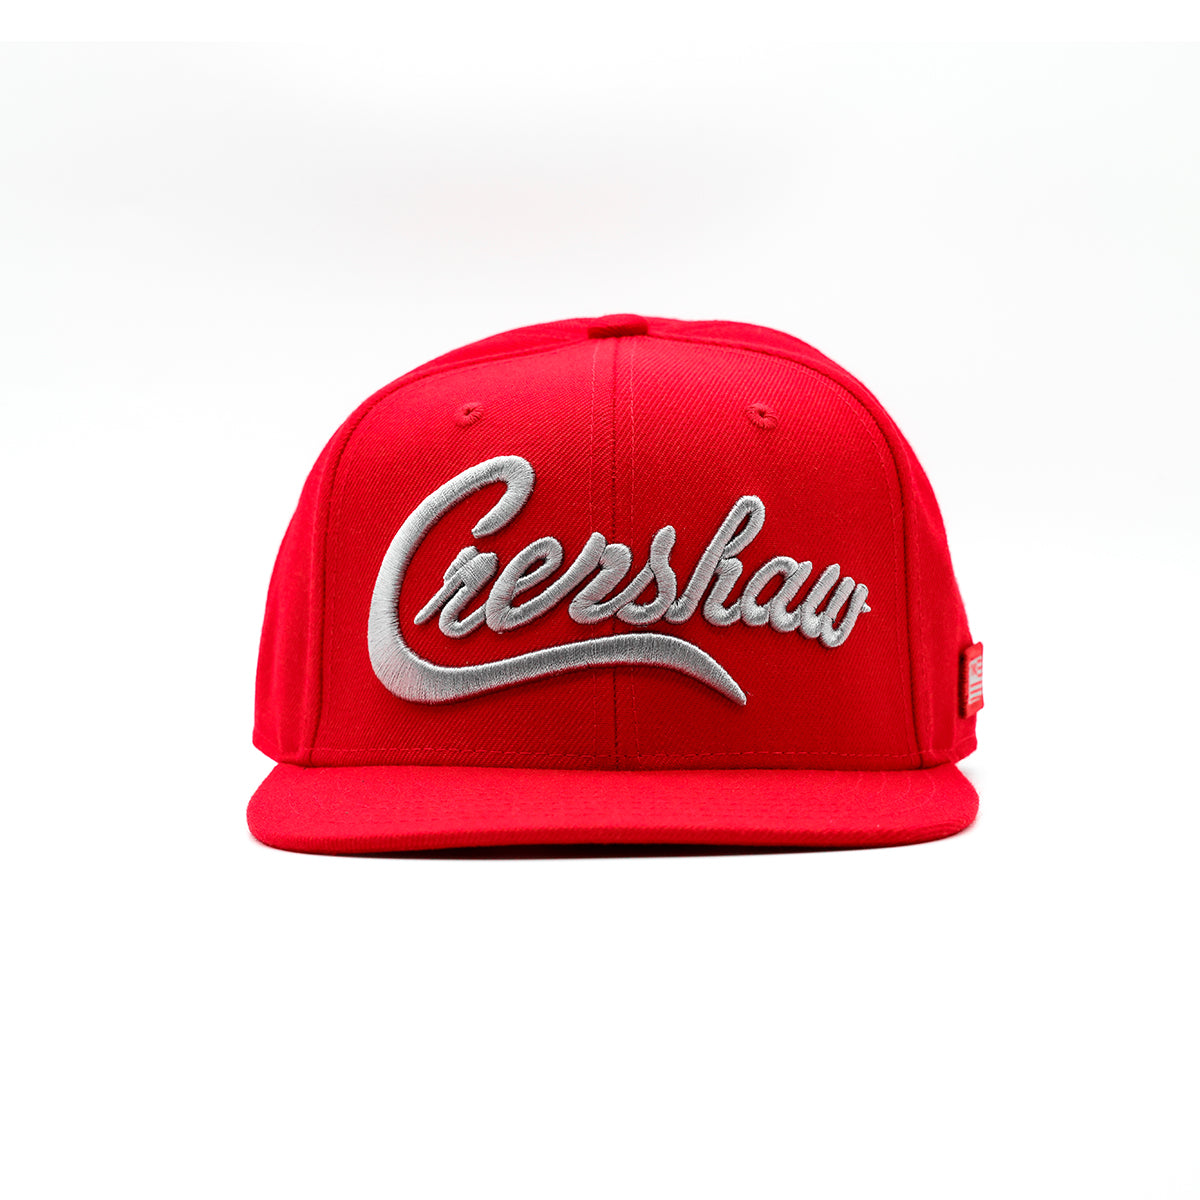 Crenshaw Limited Edition Snapback - Red/Charcoal - Front